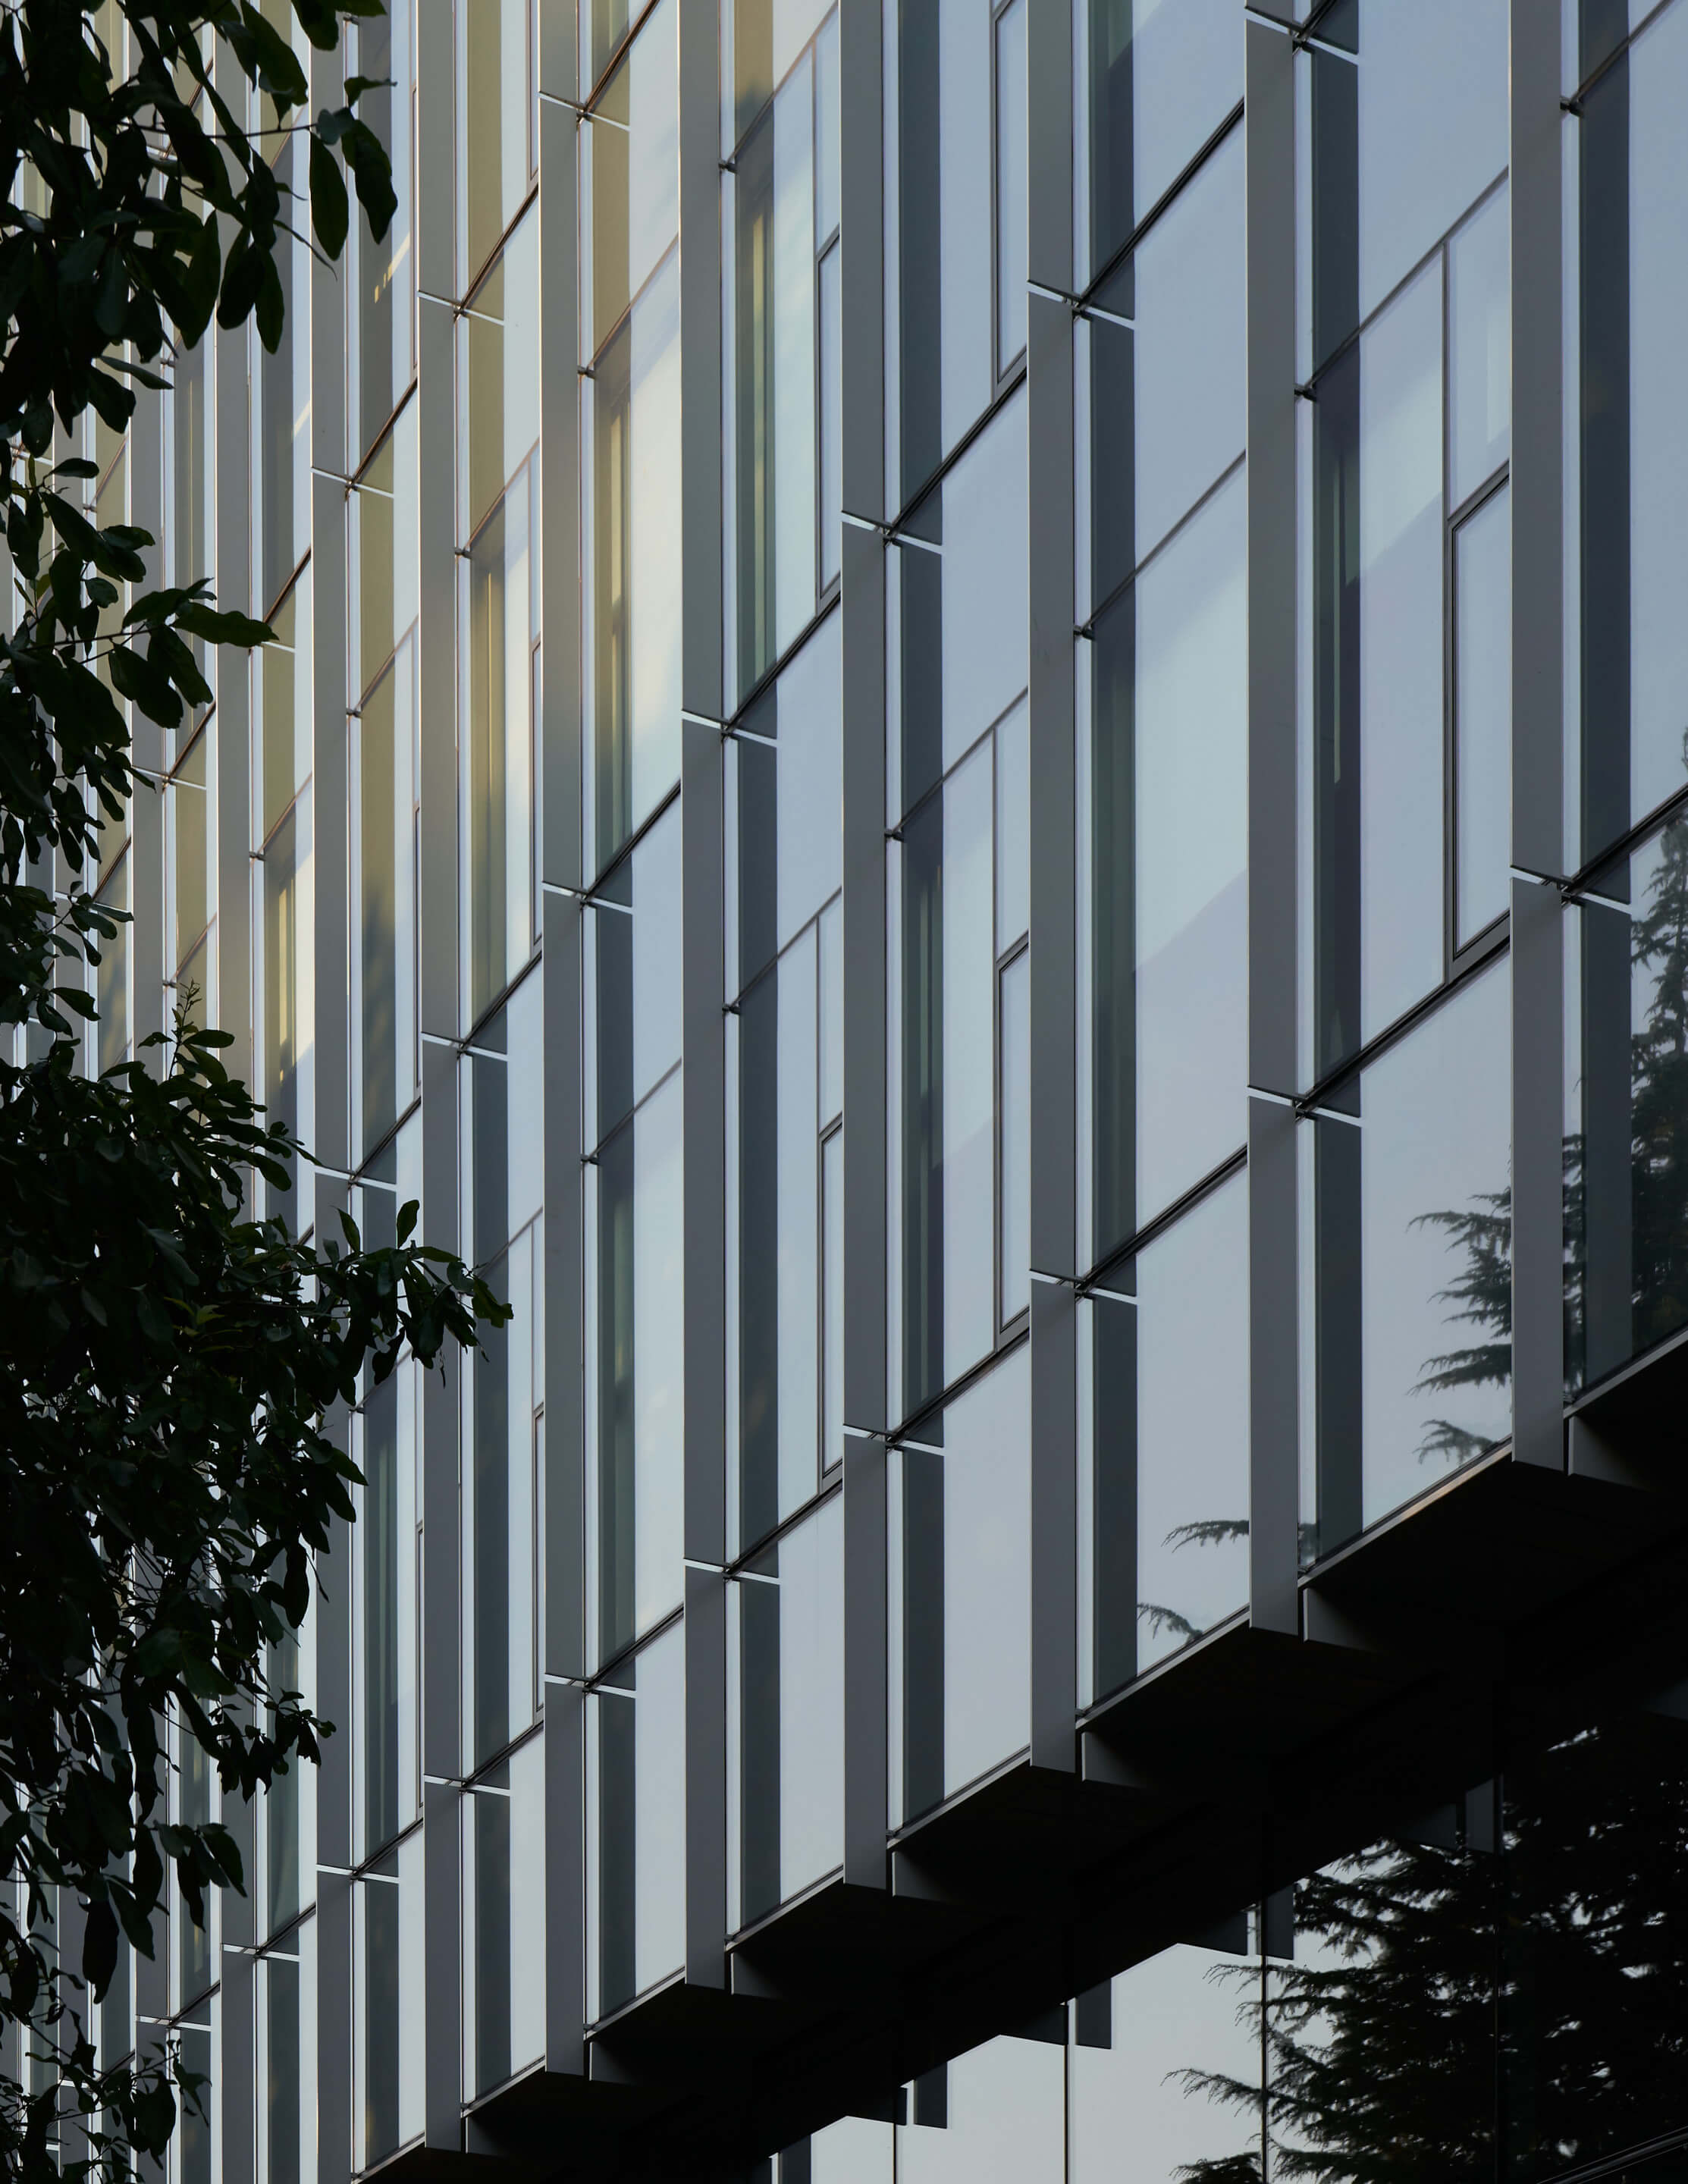 A layer of aluminum fins over glass